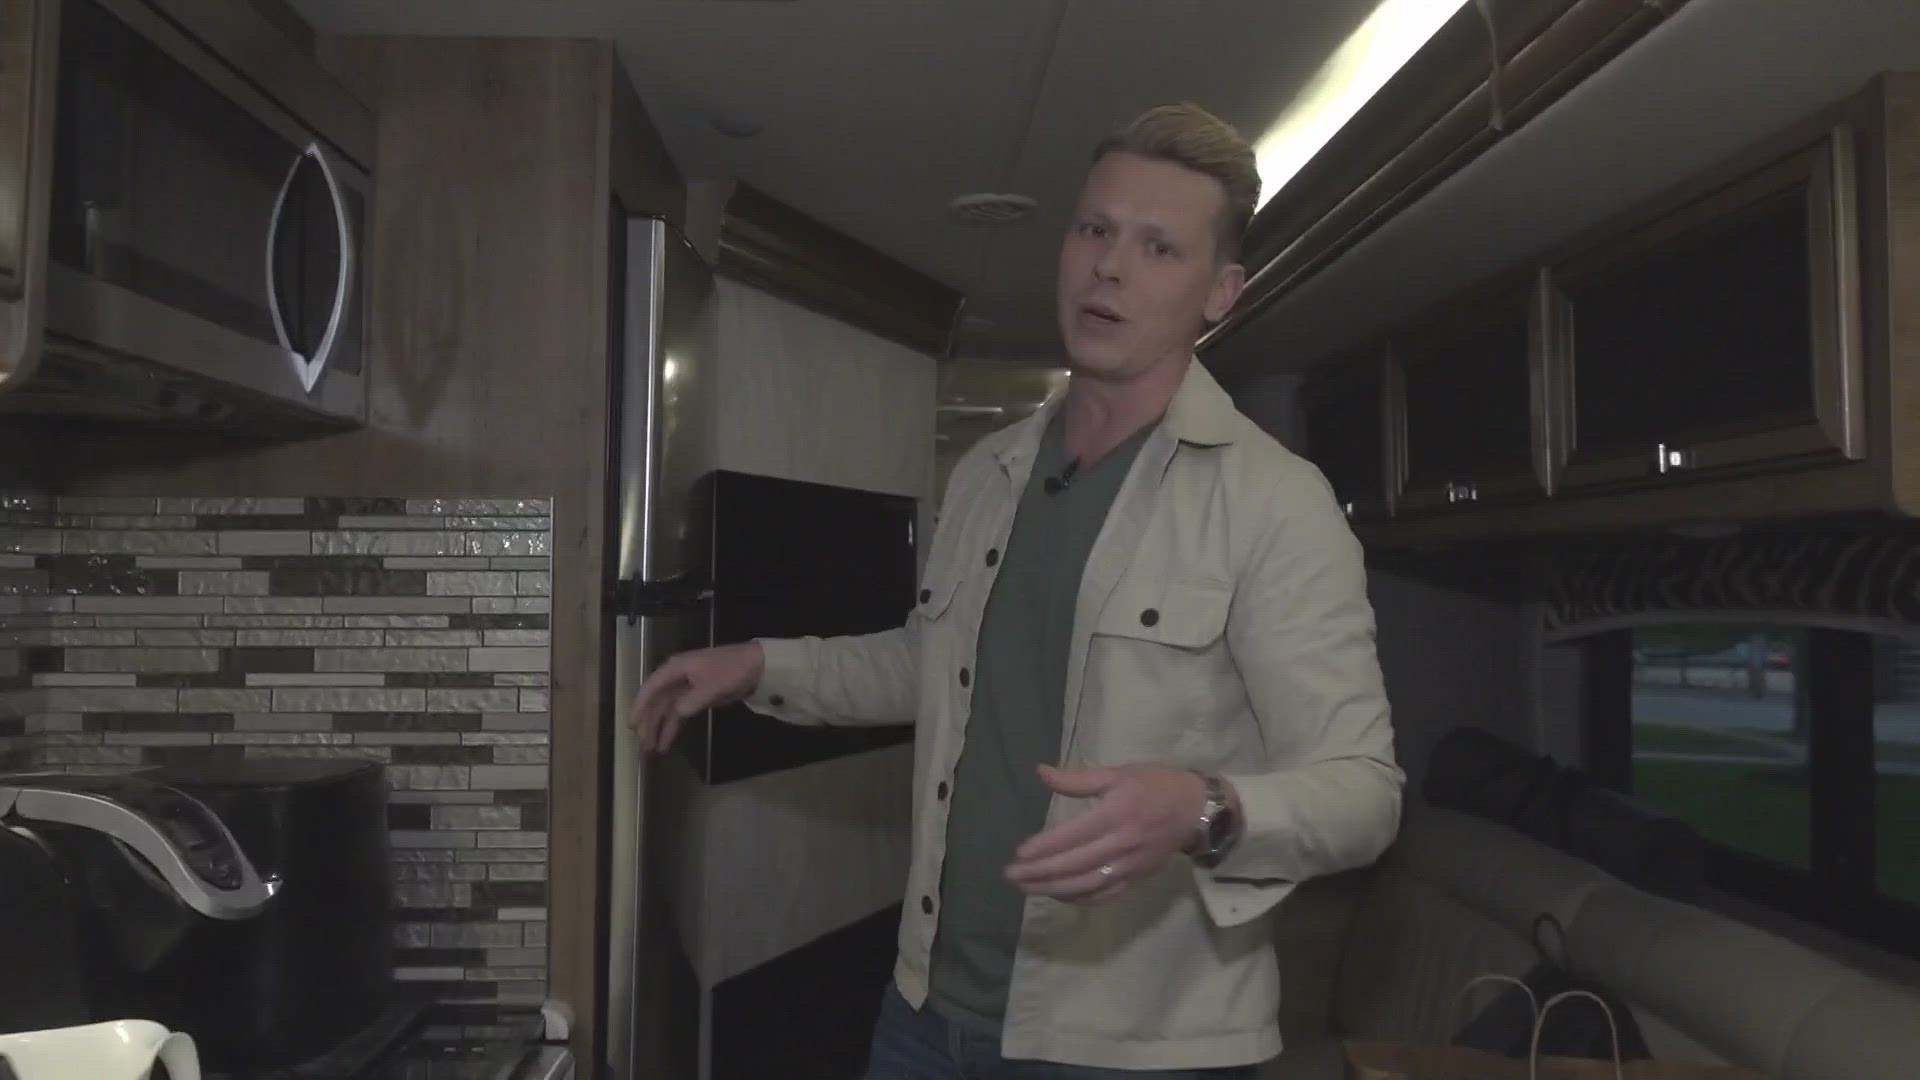 Our Austin Love is embarking on his week-long trip across Ohio. On Monday, he gave us a tour inside his RV.